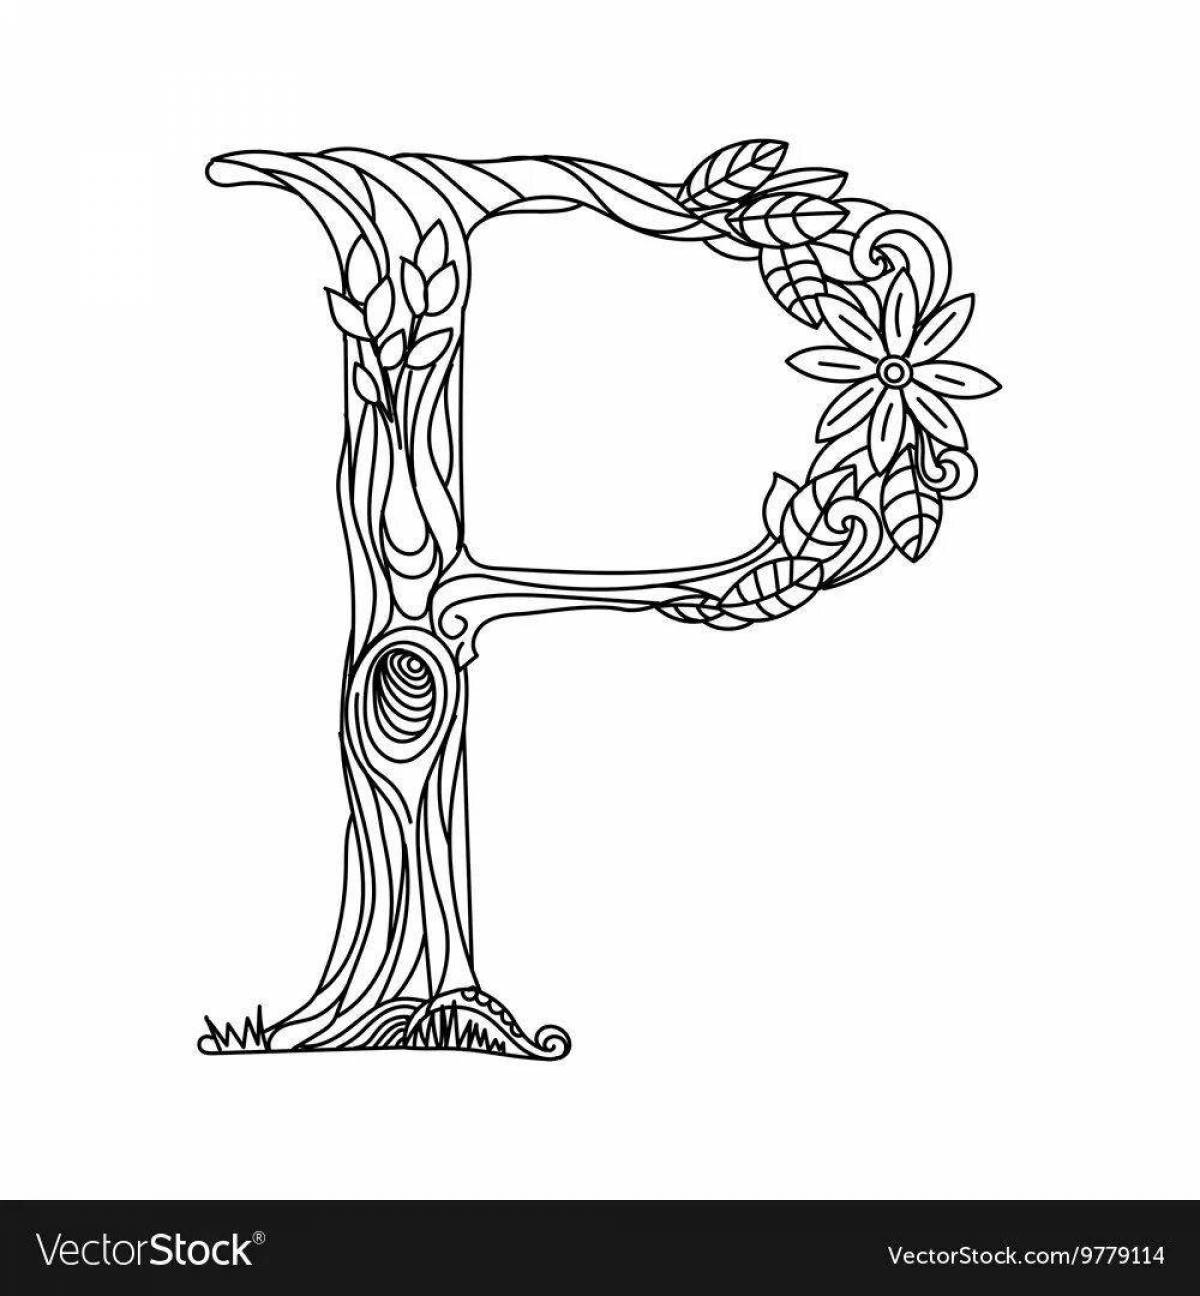 Coloring book dazzling monument to the letter e